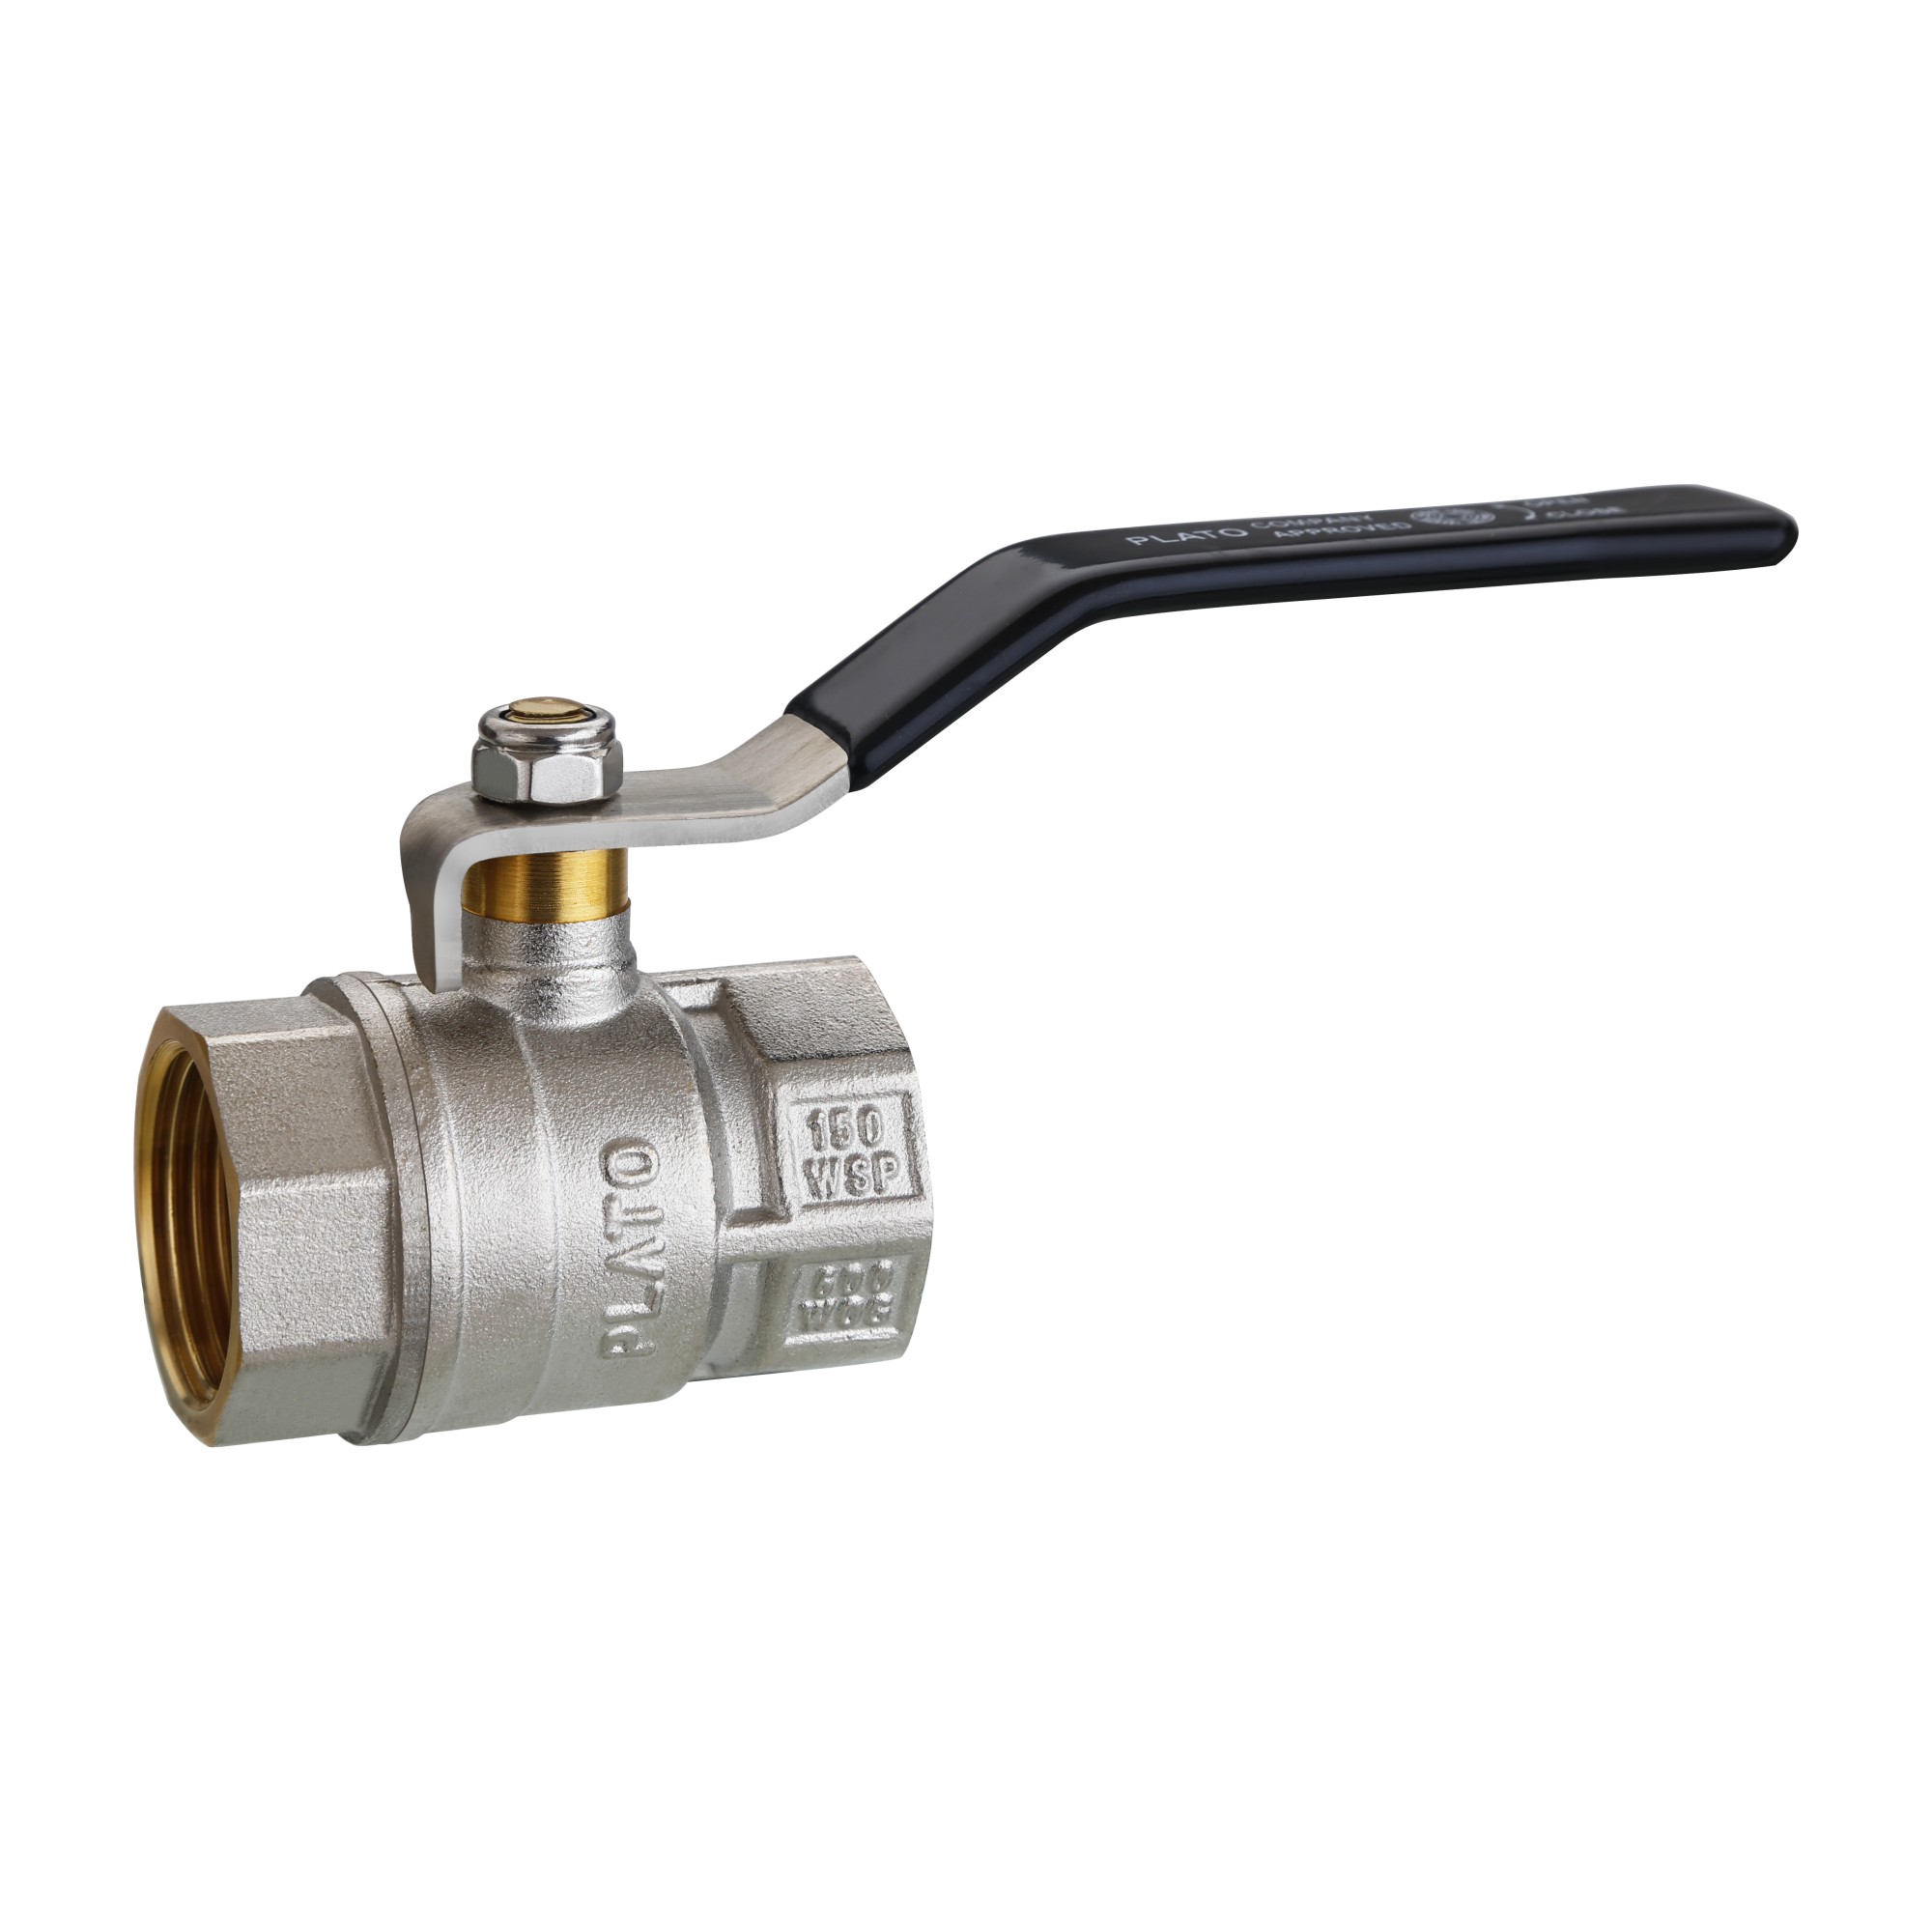 Ball Valve with Stainless Steel Handle